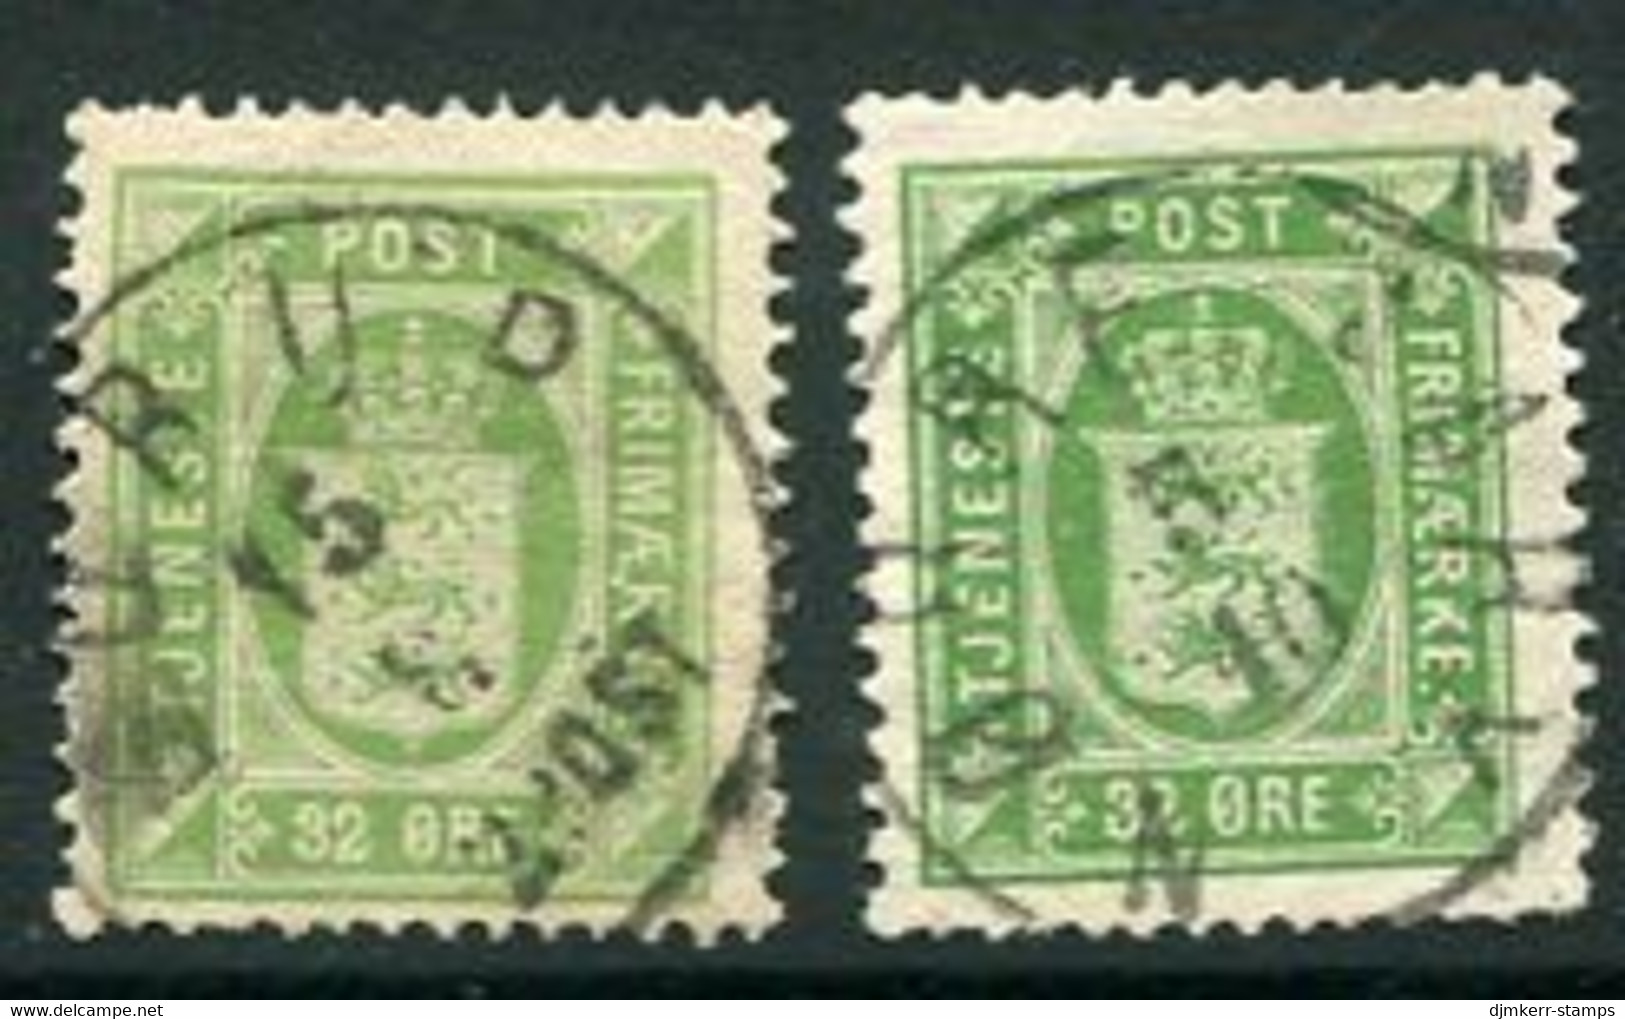 DENMARK 1875 Official 32 Øre Perforated 14 X 13½ Yellow-green And Green, Used.  SG O97-98 Cat. £109. - Service